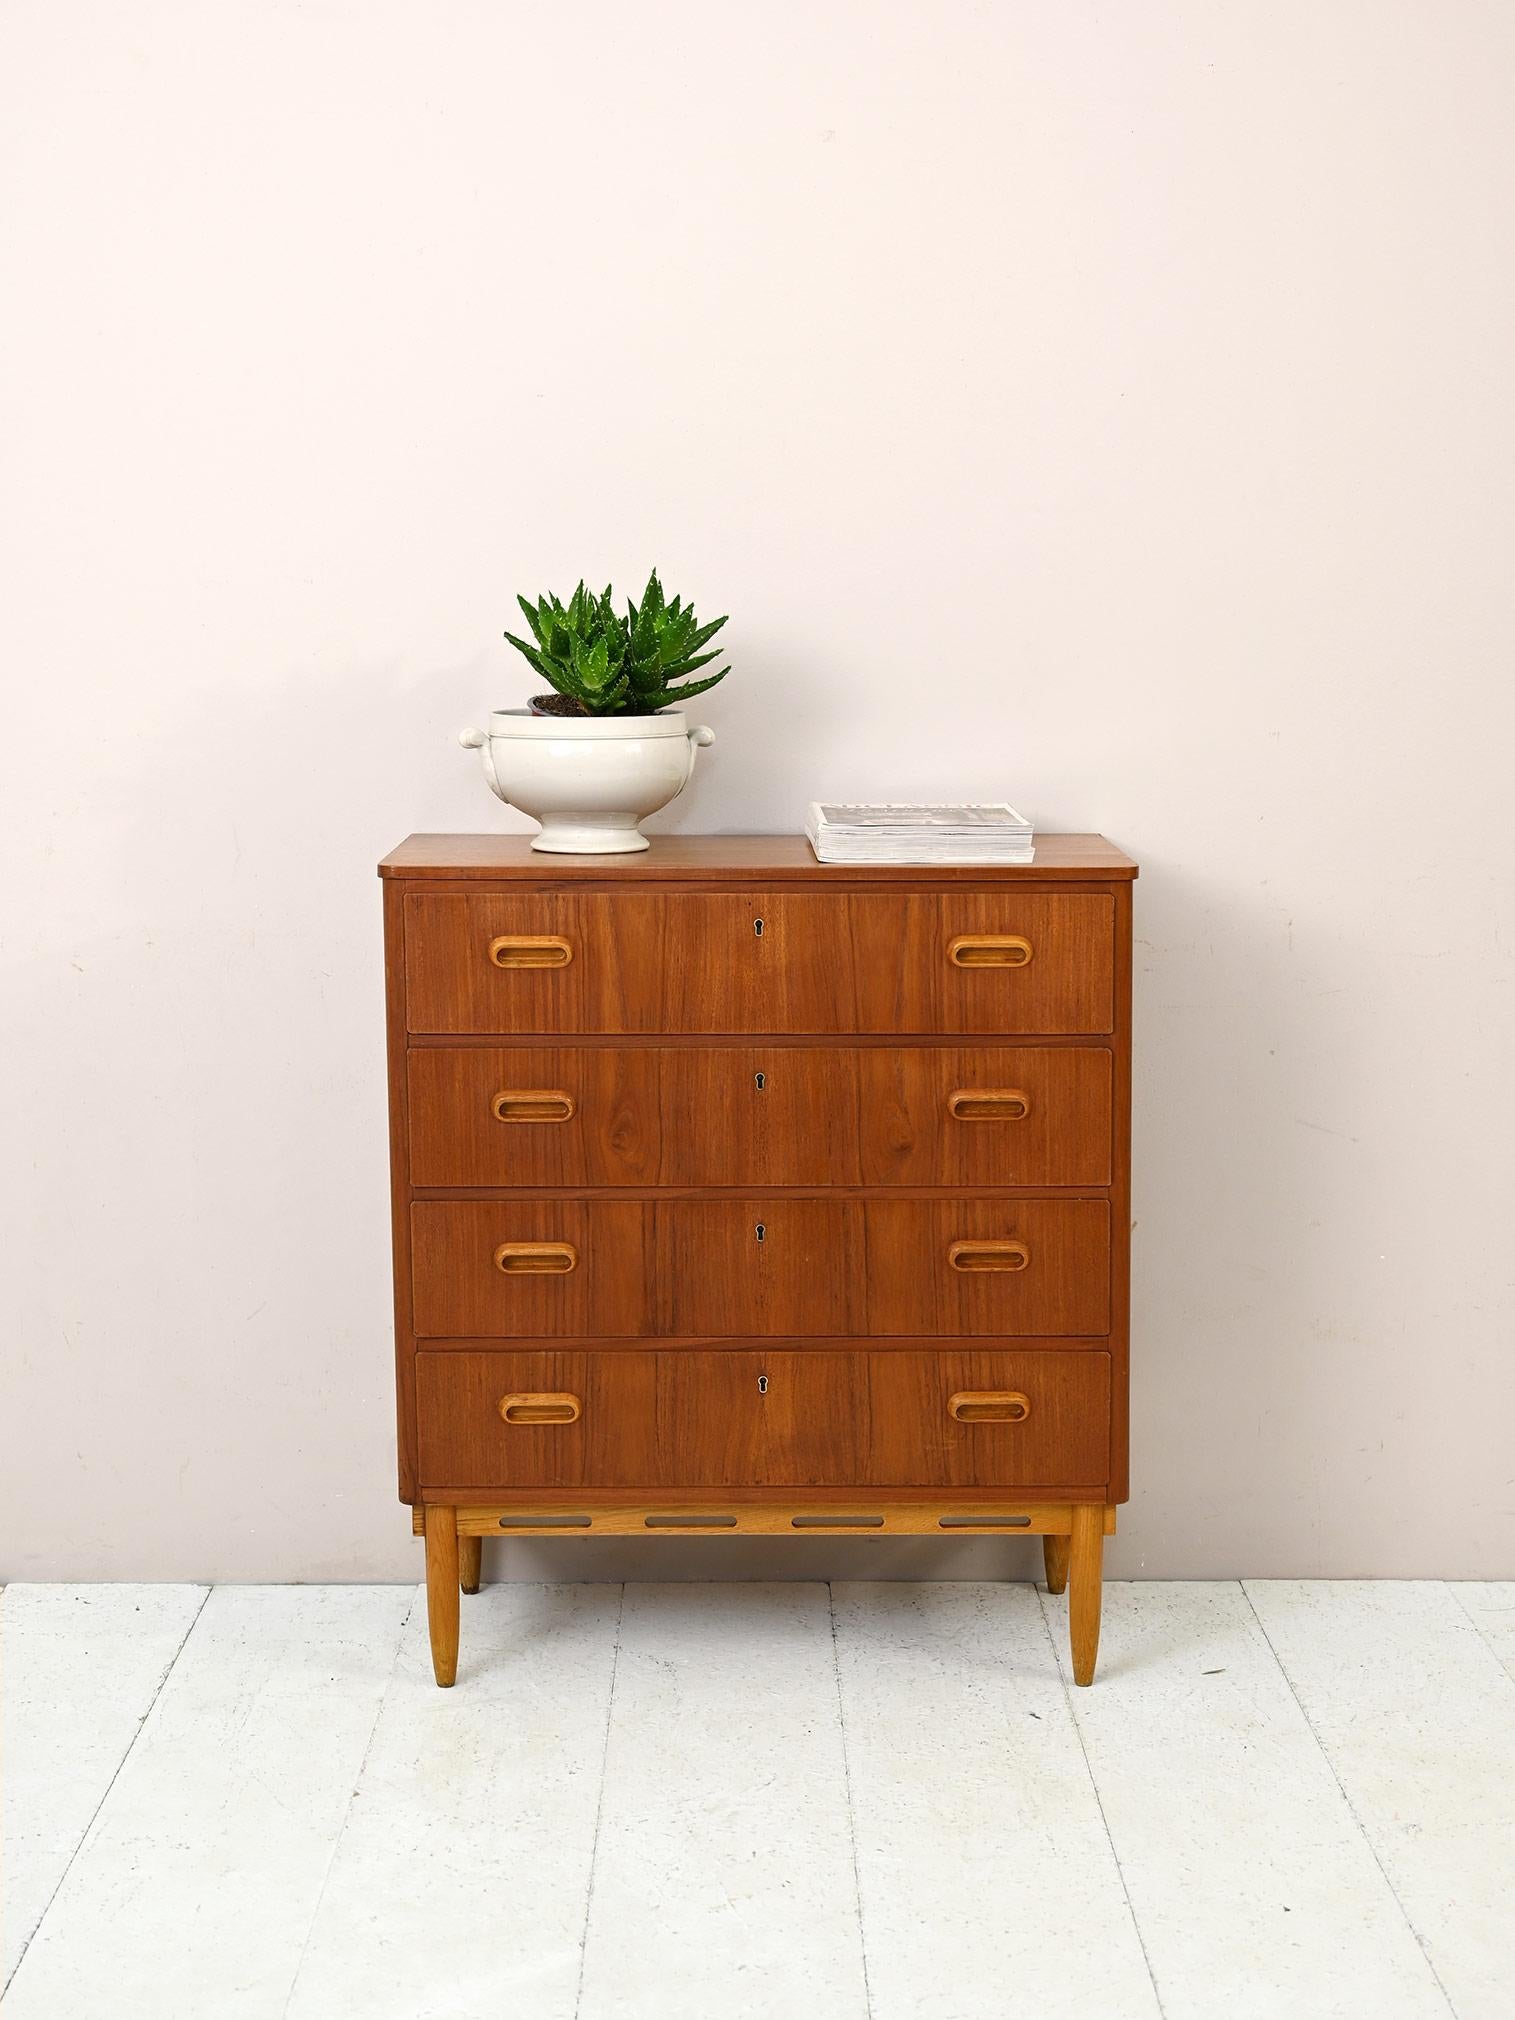 This chest of drawers with modern lines is distinguished by refined details, particularly the wood inlay present on the base. The legs and handle of the carved wooden drawers are made of light oak that stands out from the rest of the teak frame.
An